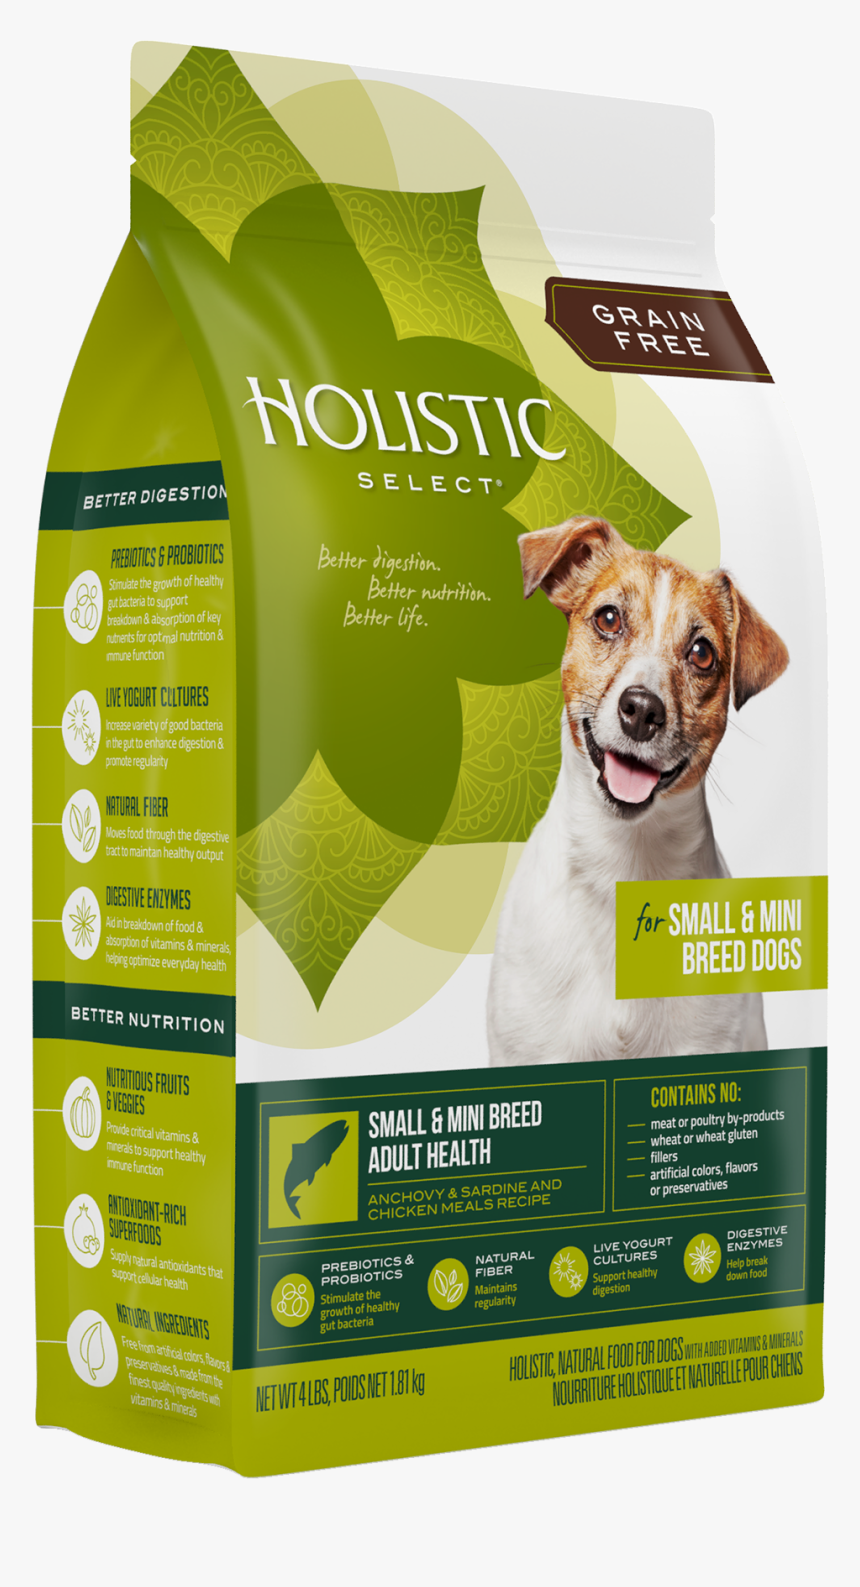 Product Packaging Image - Holistic Select Small Mini Breed Puppy Health Anchovy, HD Png Download, Free Download